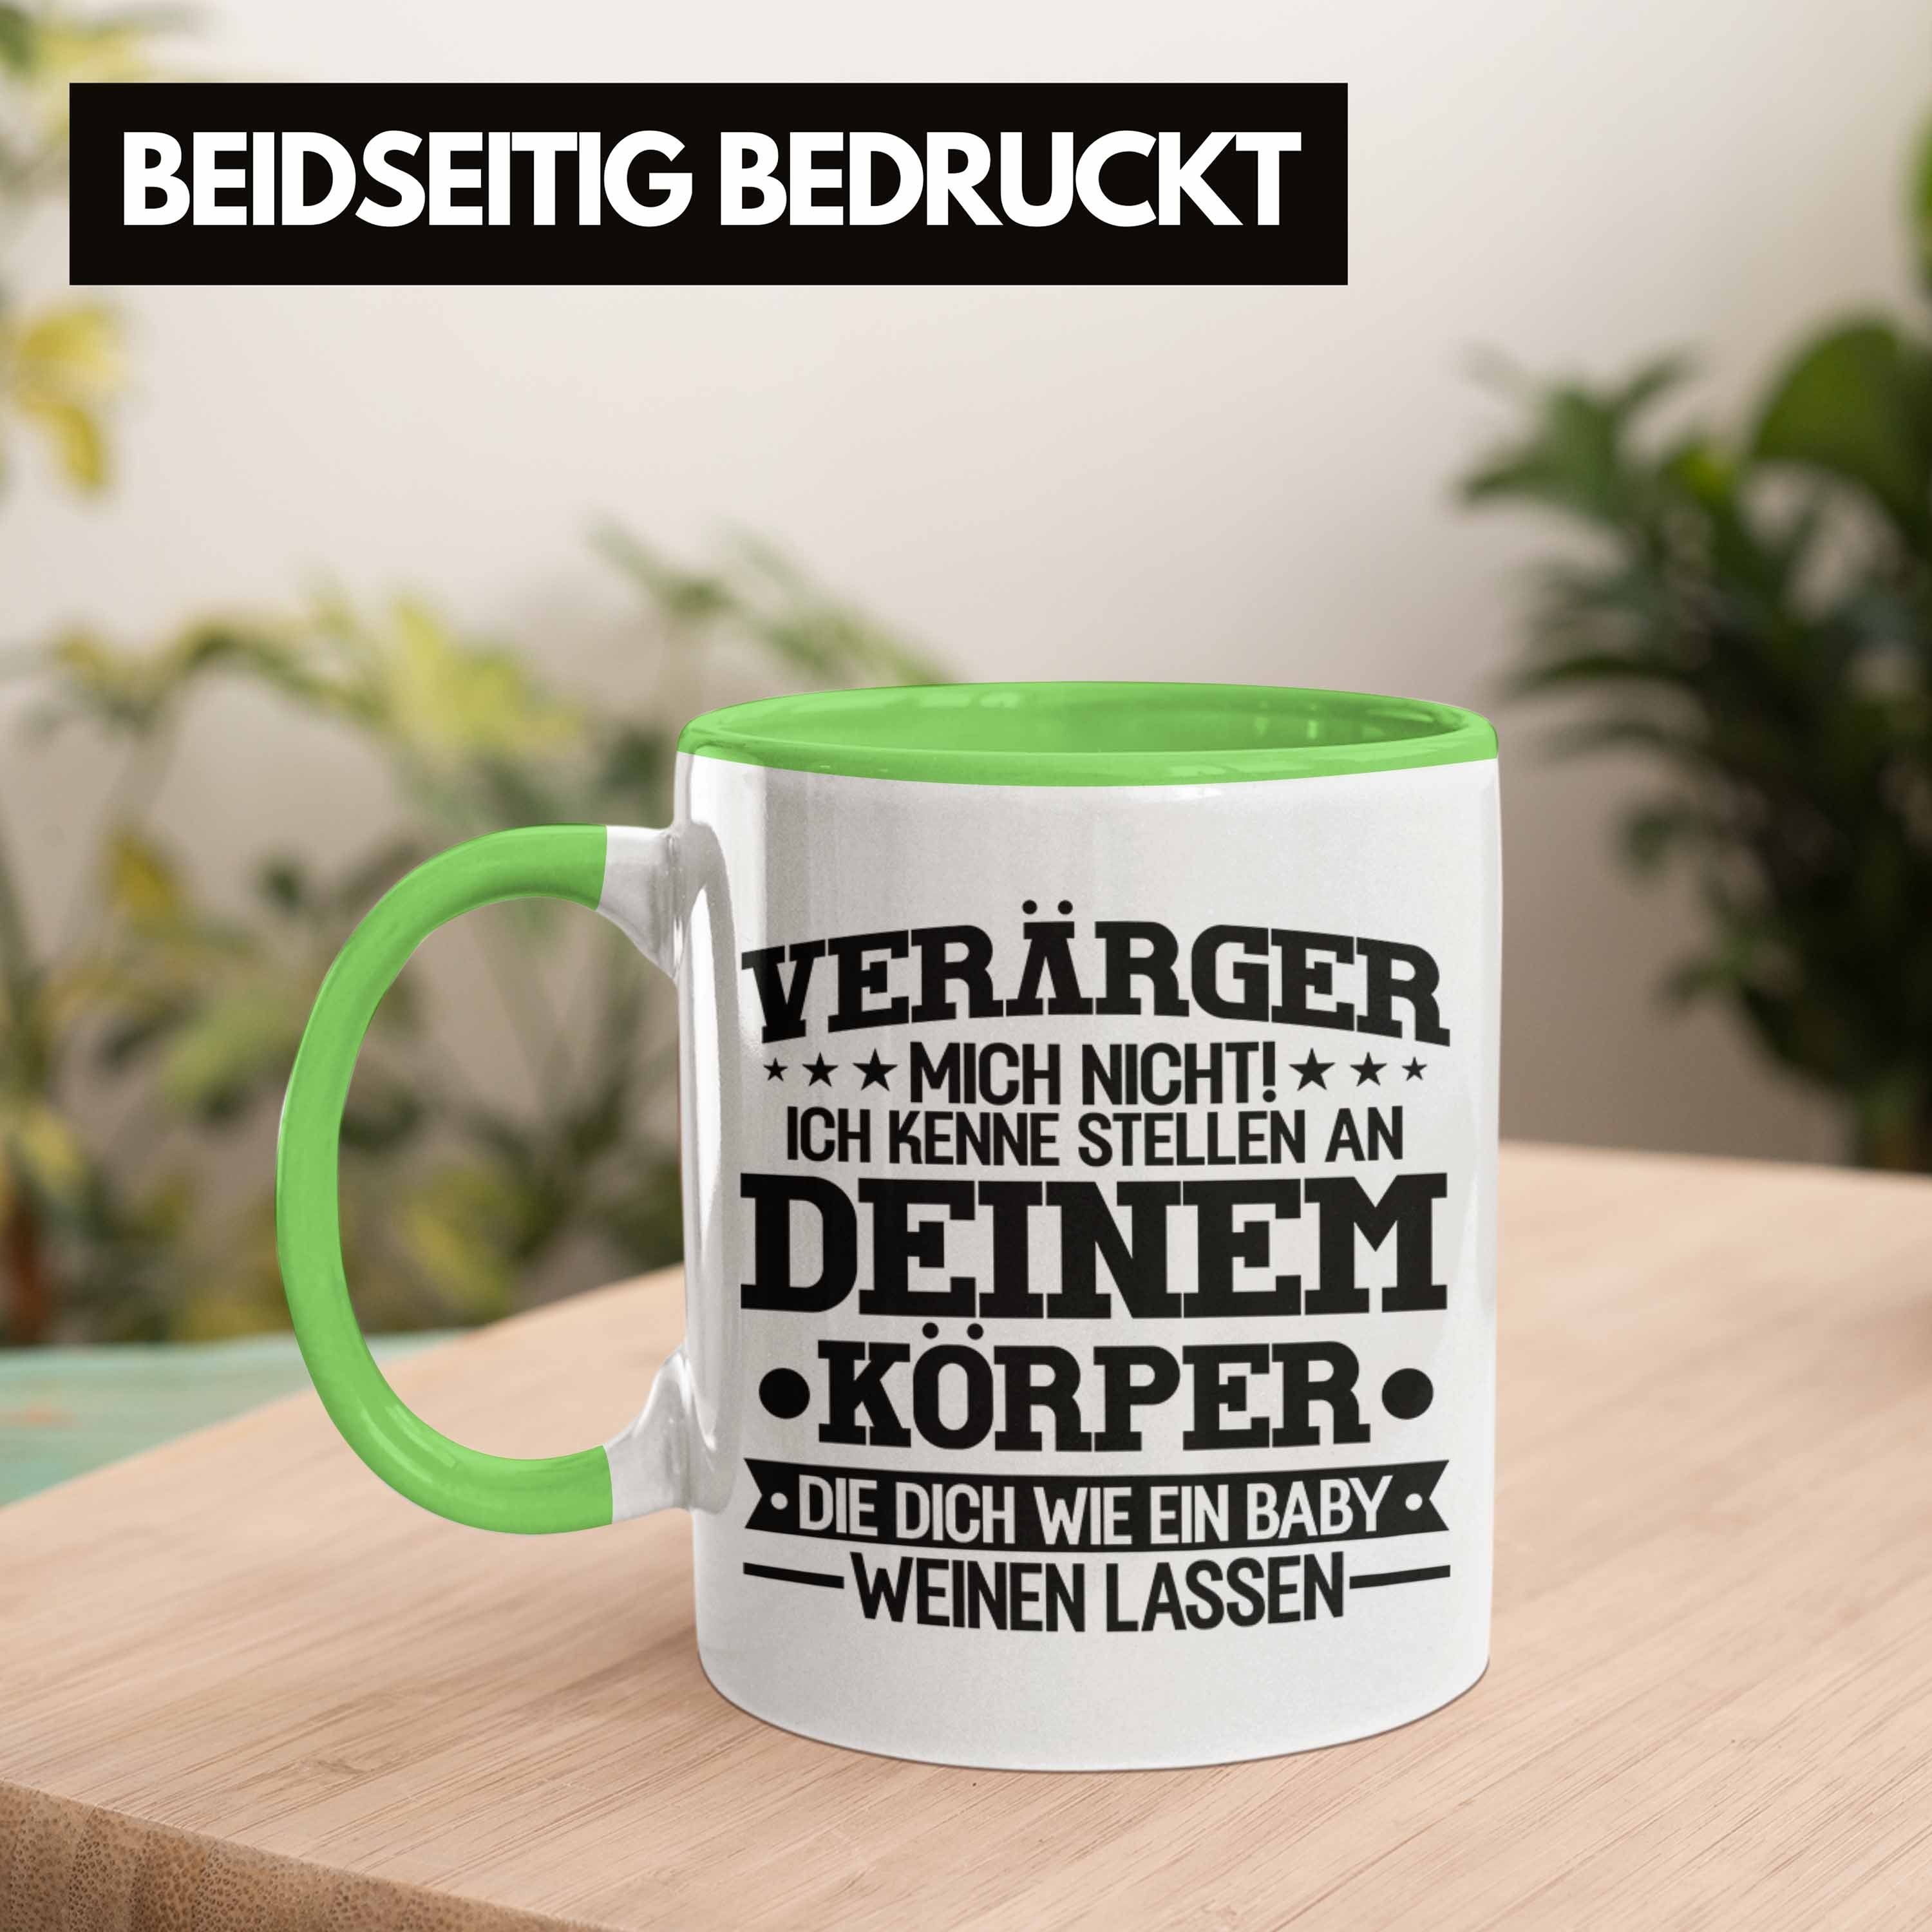 Praxis Trendation Geschenk Physiotherapie Tasse Geschenkidee Grün - Lustiger Trendation Tasse Spruch Physiotherapeut